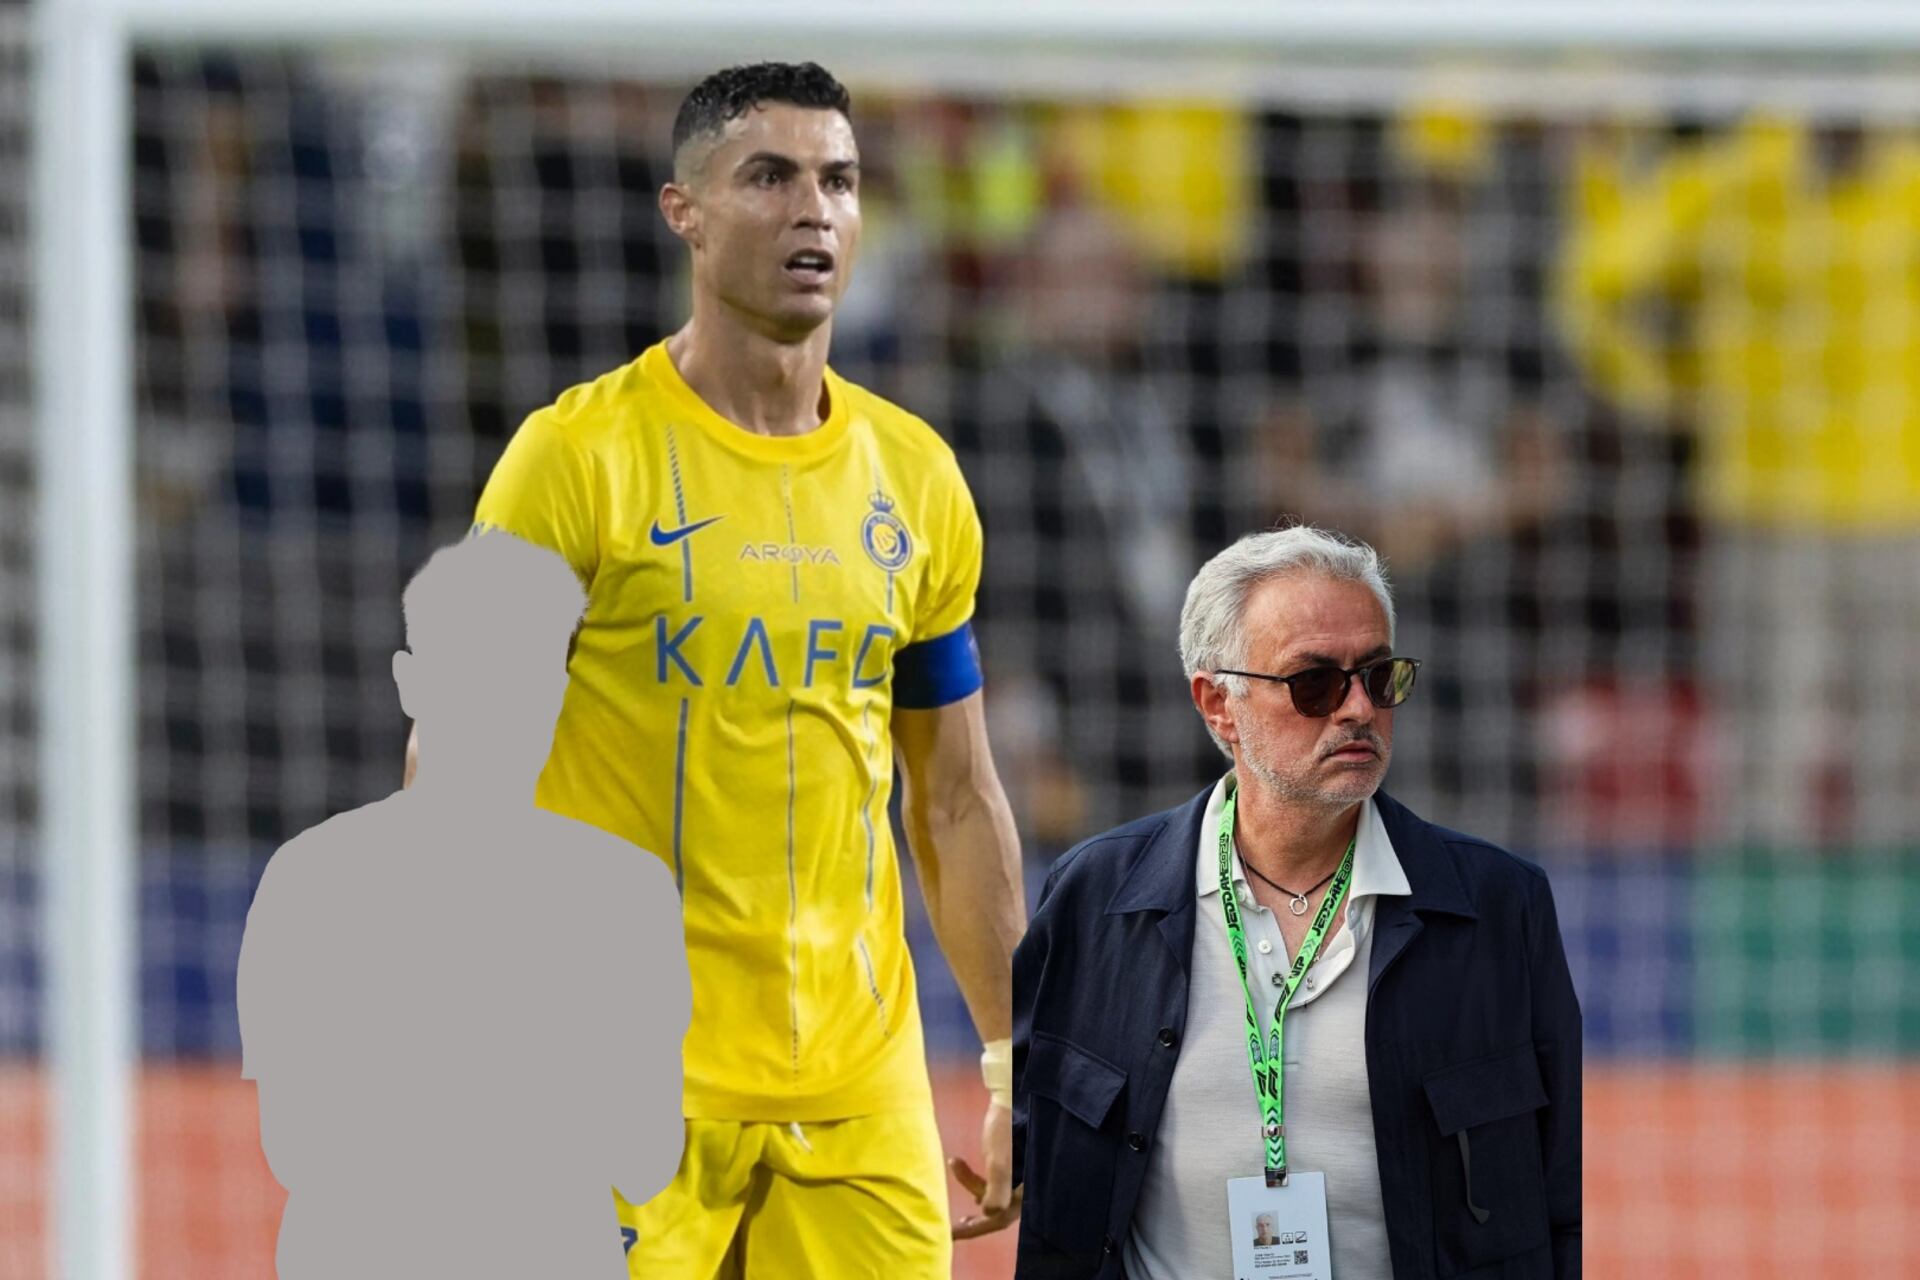 Not only they want to bring Mourinho to please Cristiano, the $70M Portuguese teammate that Al Nassr wants to sign